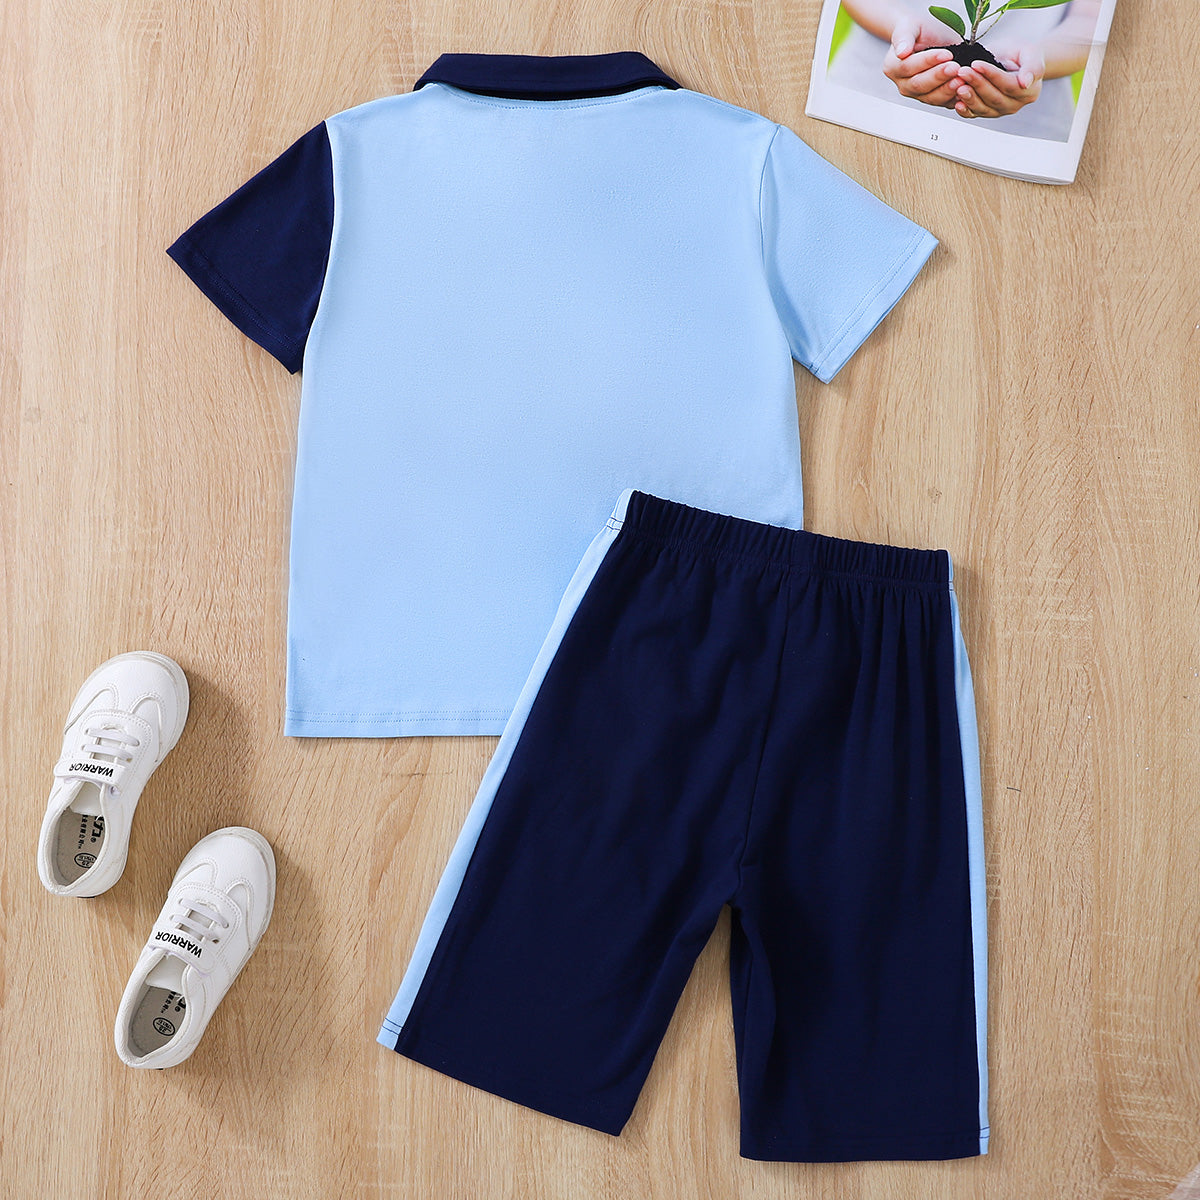 Children’s Boys Color Block Polo Shirt and Shorts Set